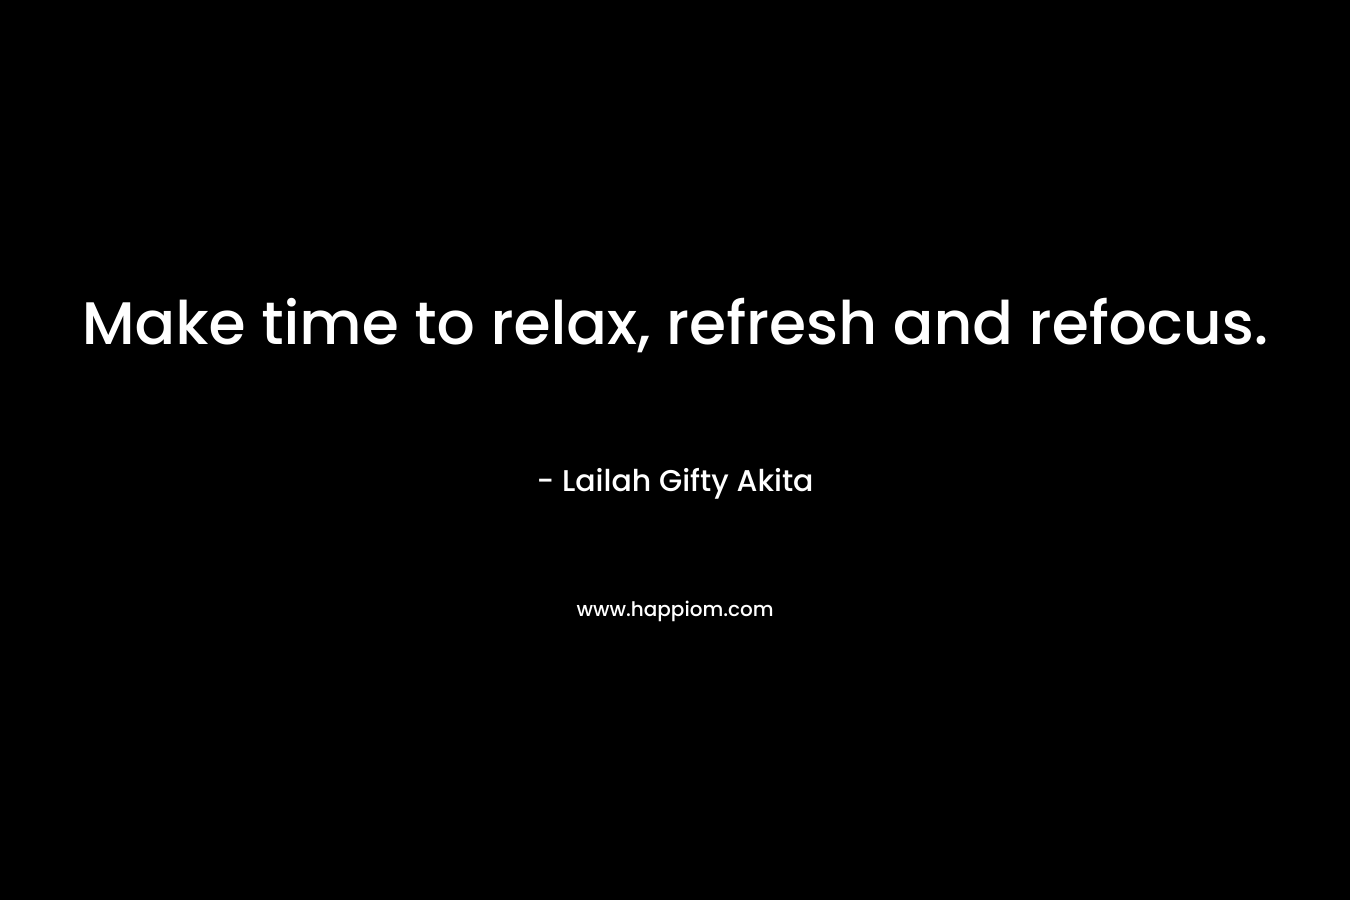 Make time to relax, refresh and refocus. – Lailah Gifty Akita